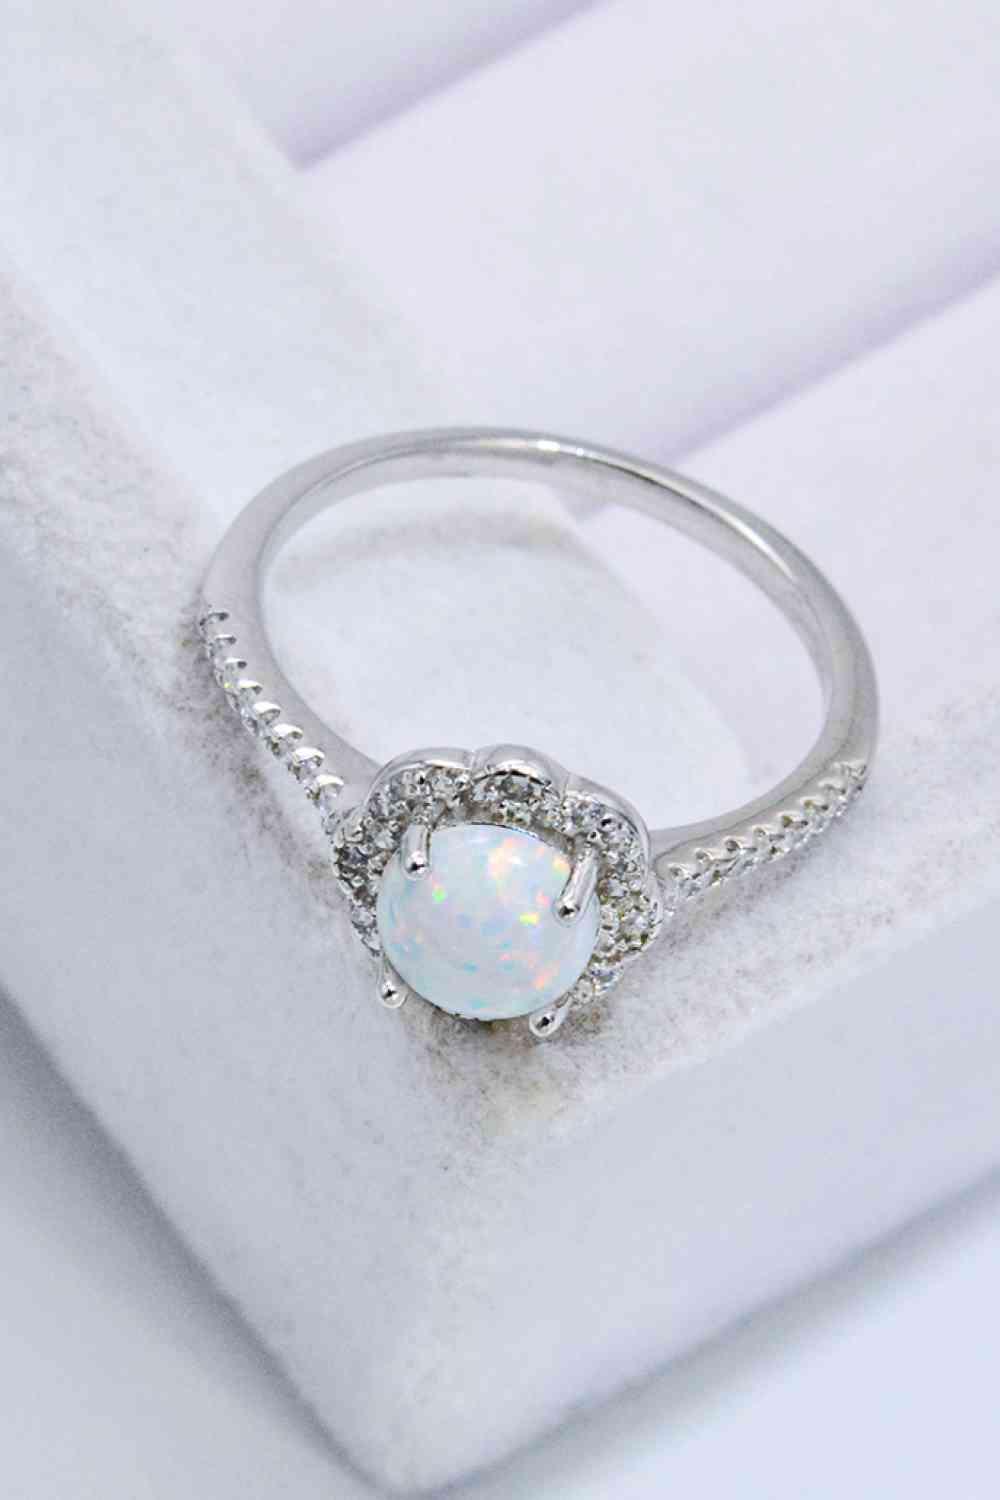 Opal 4-Prong, 925 Sterling Silver, Platinum-Plated Ring - God's Girl Gifts And Apparel